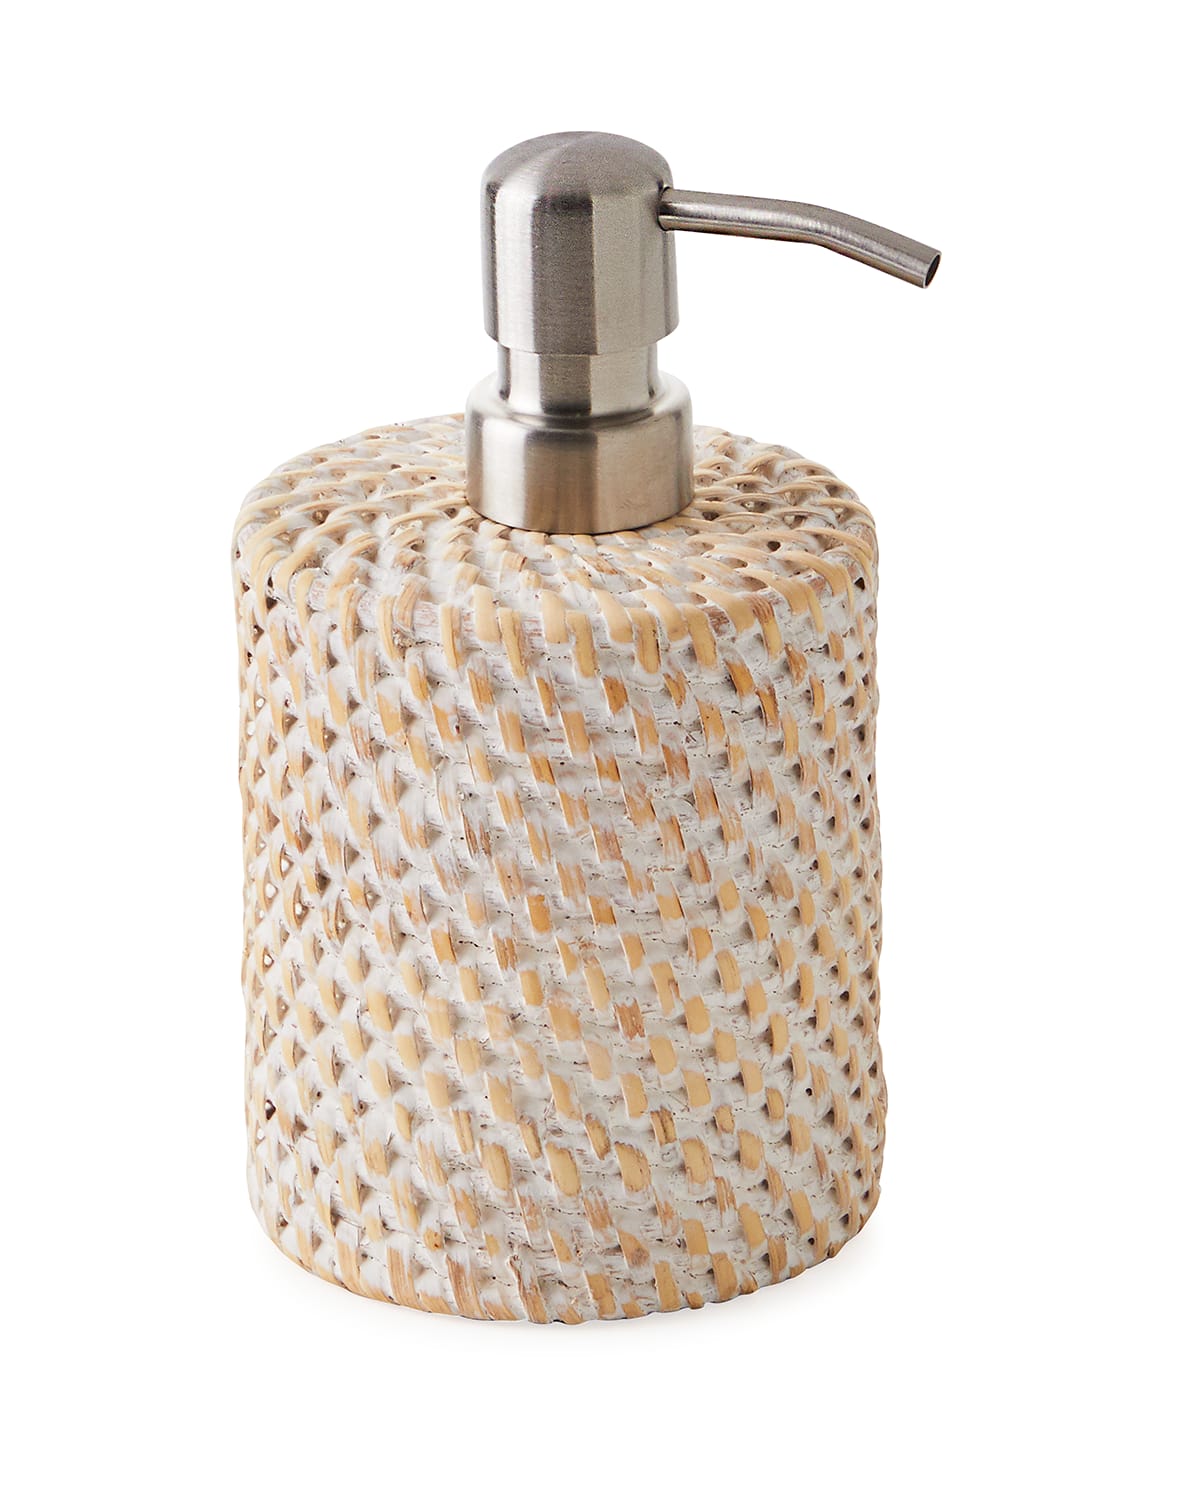 NEW MIKE+ALLY WHITE RESIN+SILVER CHAIN PATTERN WITH CRYSTALS TRIM SOAP DISPENSER 